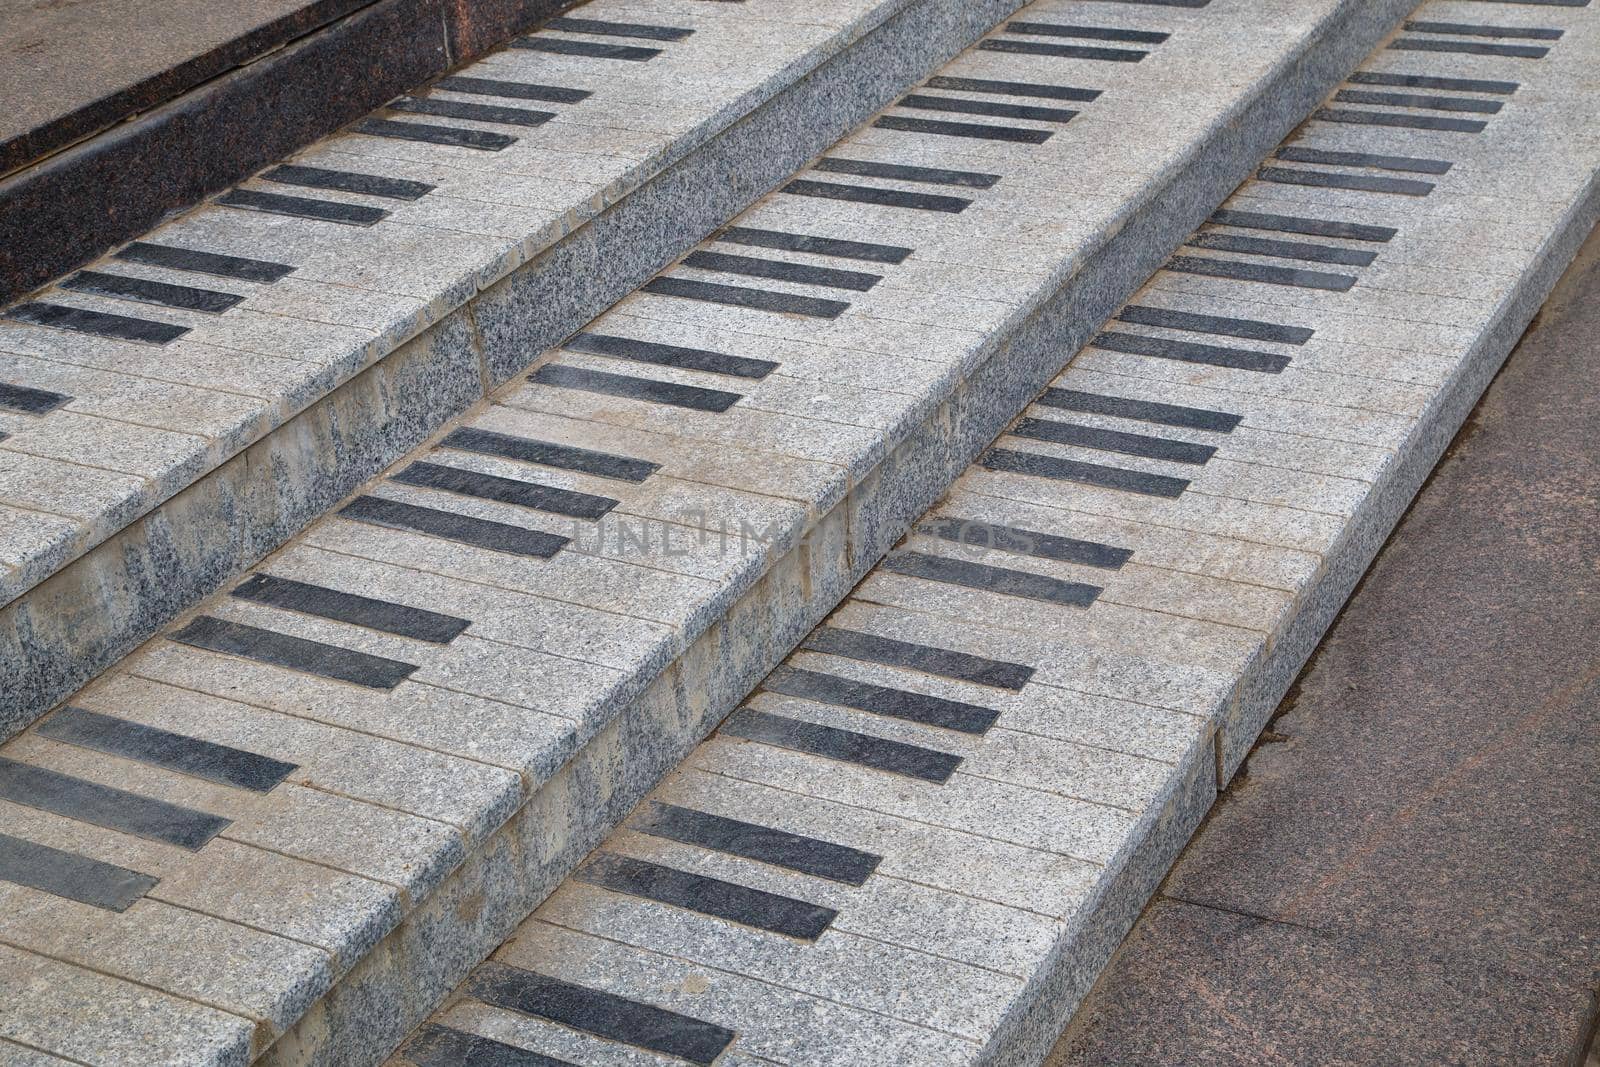 public granite stairs stylised as piano keys - close-up view by z1b